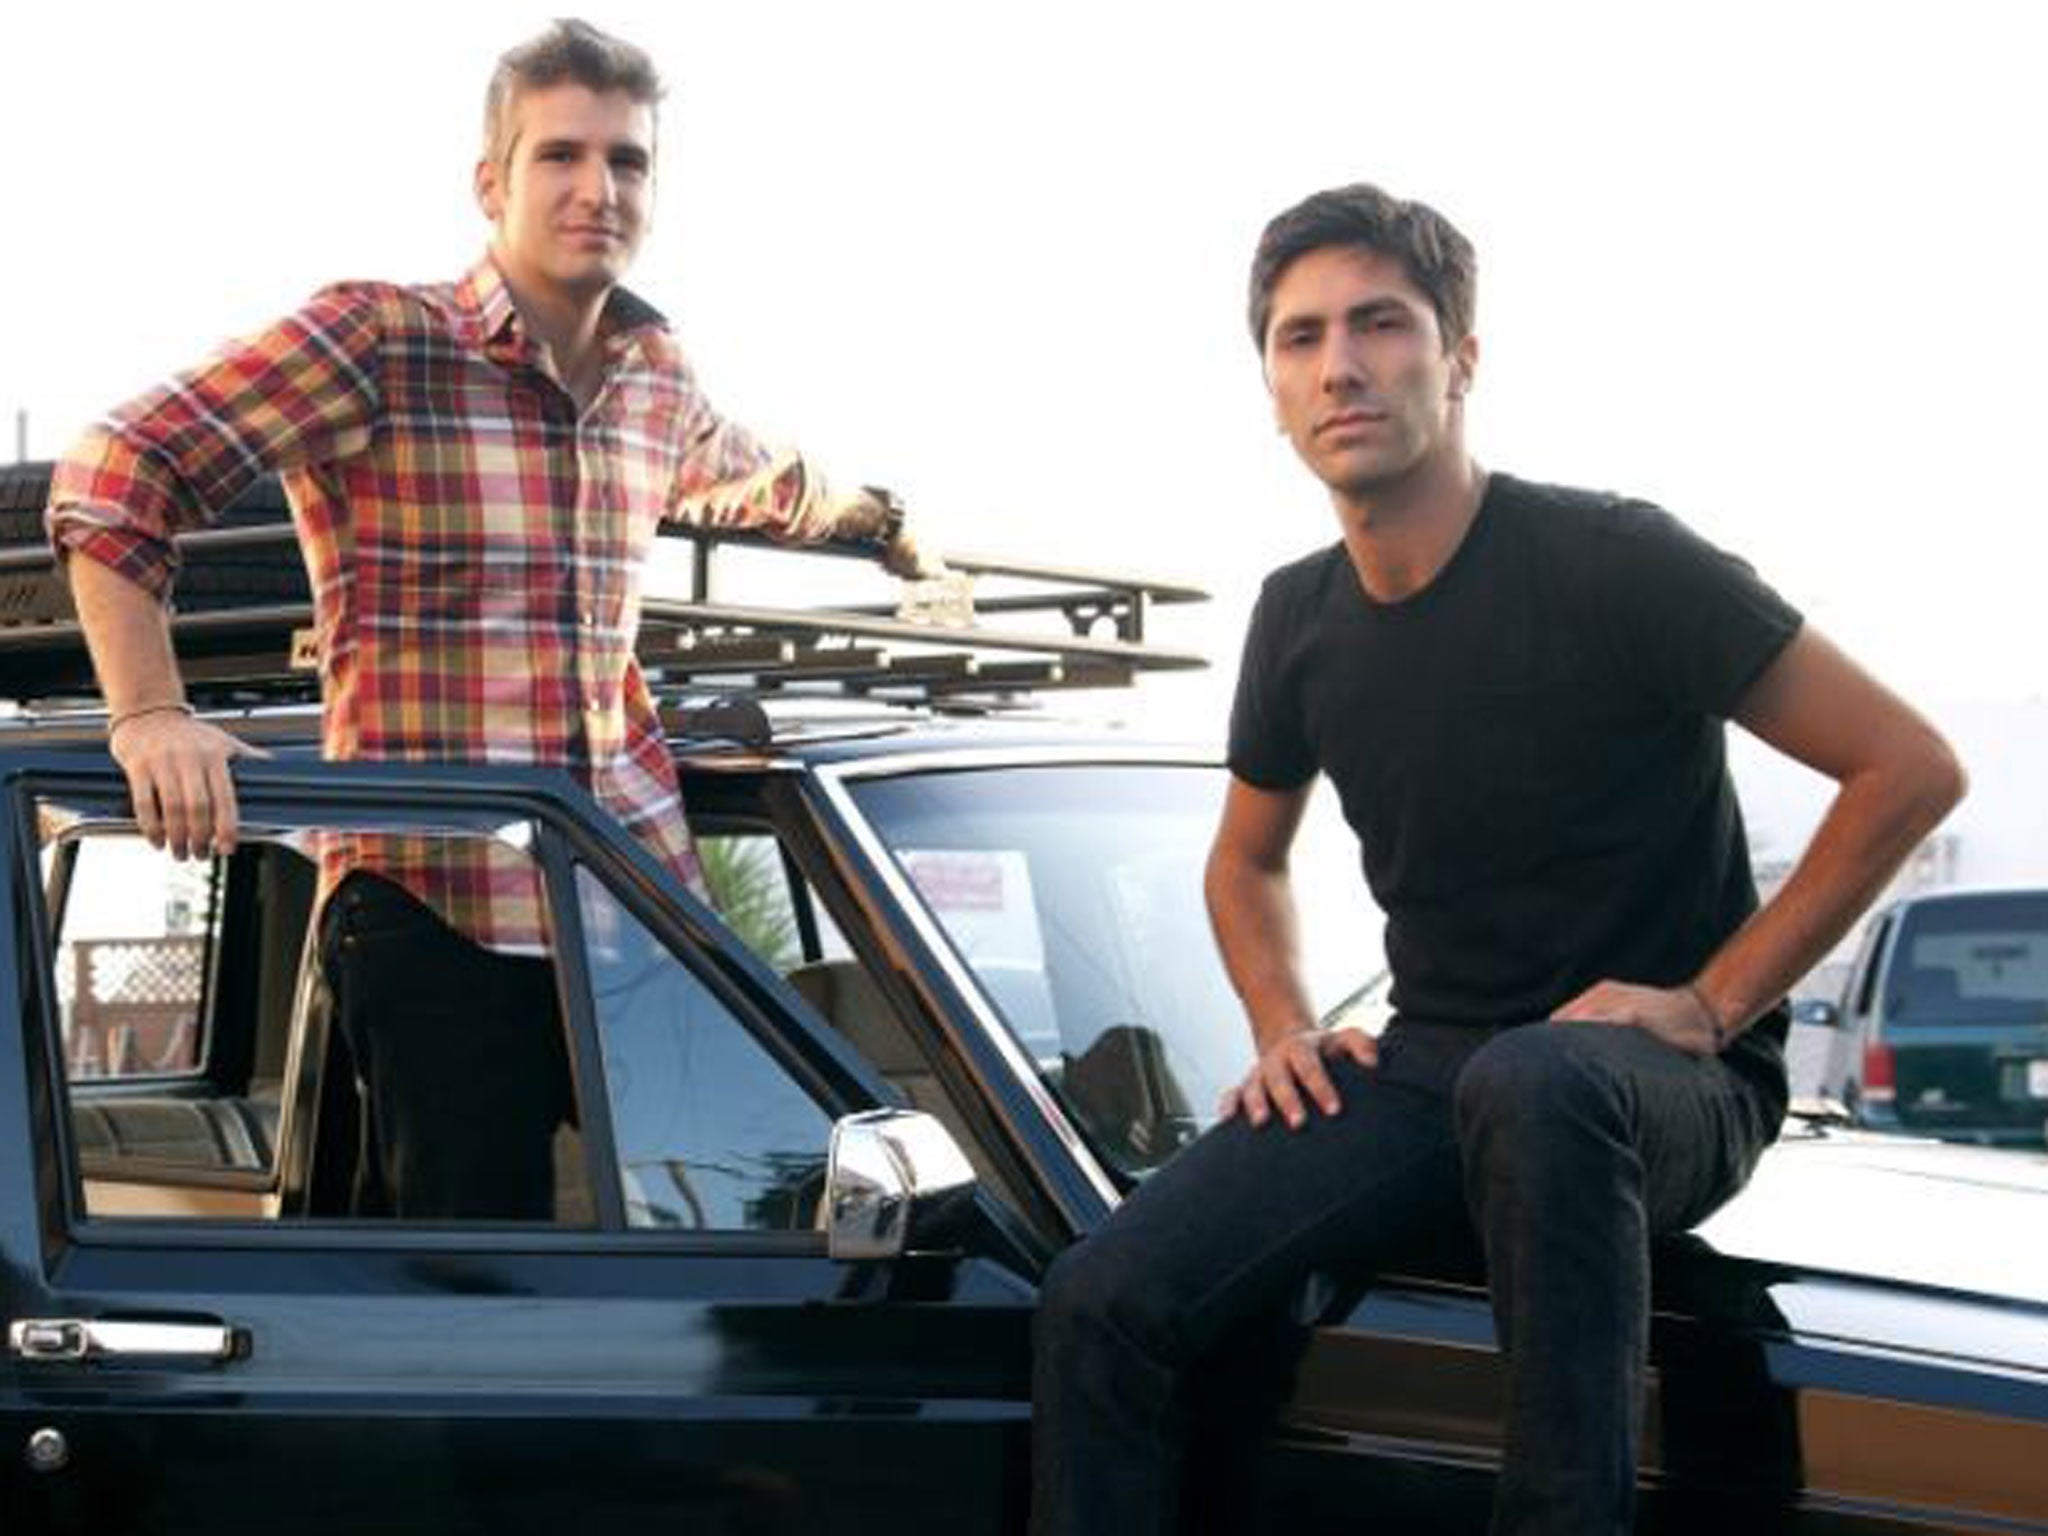 You’ll be hooked: Max Joseph (left) and Nev Schulman investigate fake online relationships in ‘Catfish’